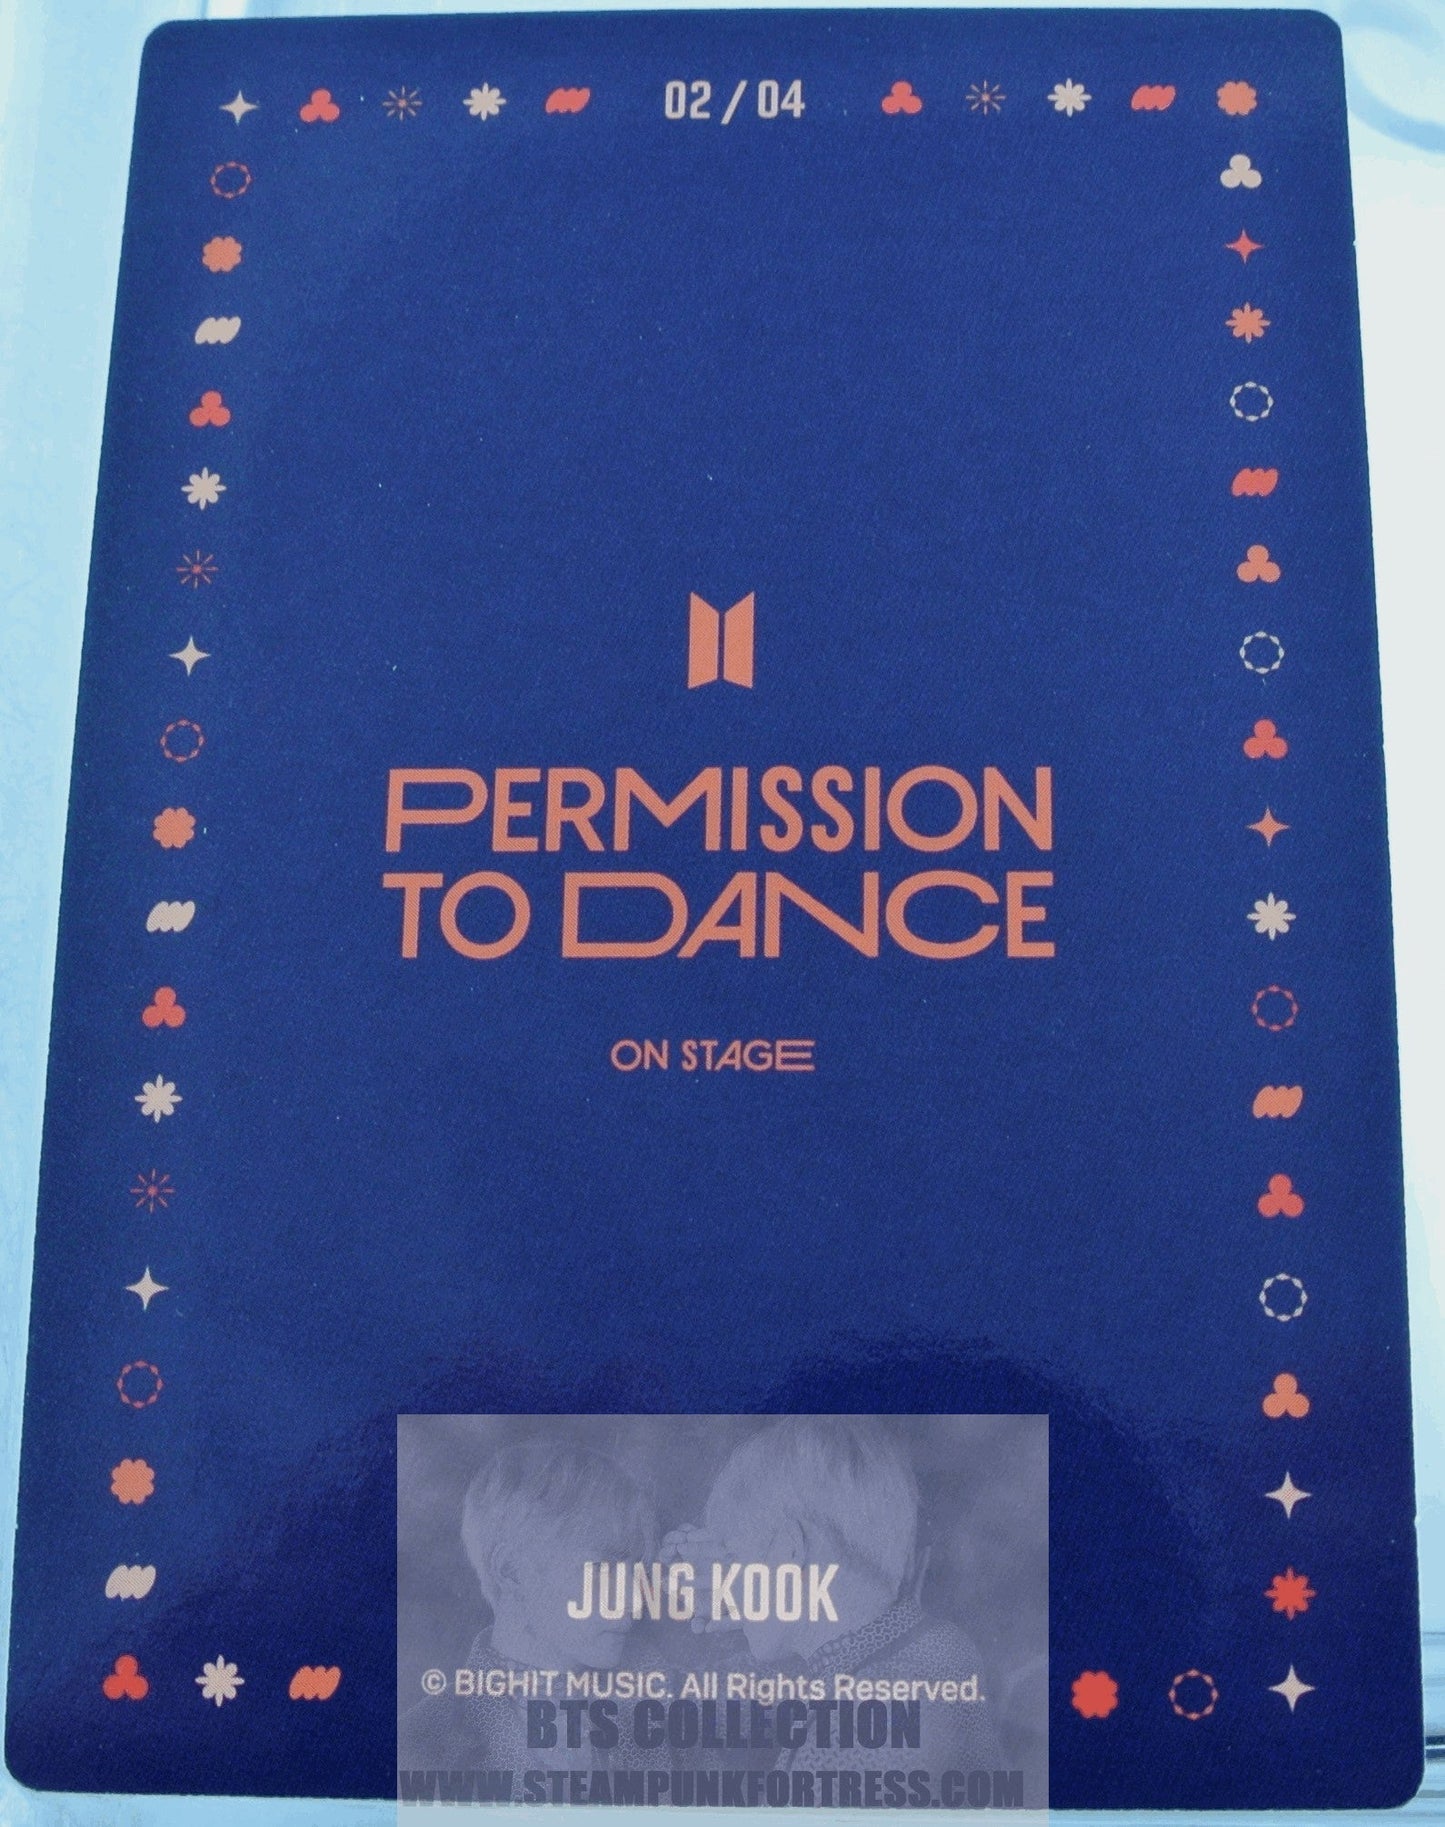 BTS JUNGKOOK JEON JUNG-KOOK PTD 2022 PERMISSION TO DANCE ON STAGE SEOUL PHOTOCARD PHOTO CARD PC #2 OF 4 NEW OFFICIAL MERCHANDISE